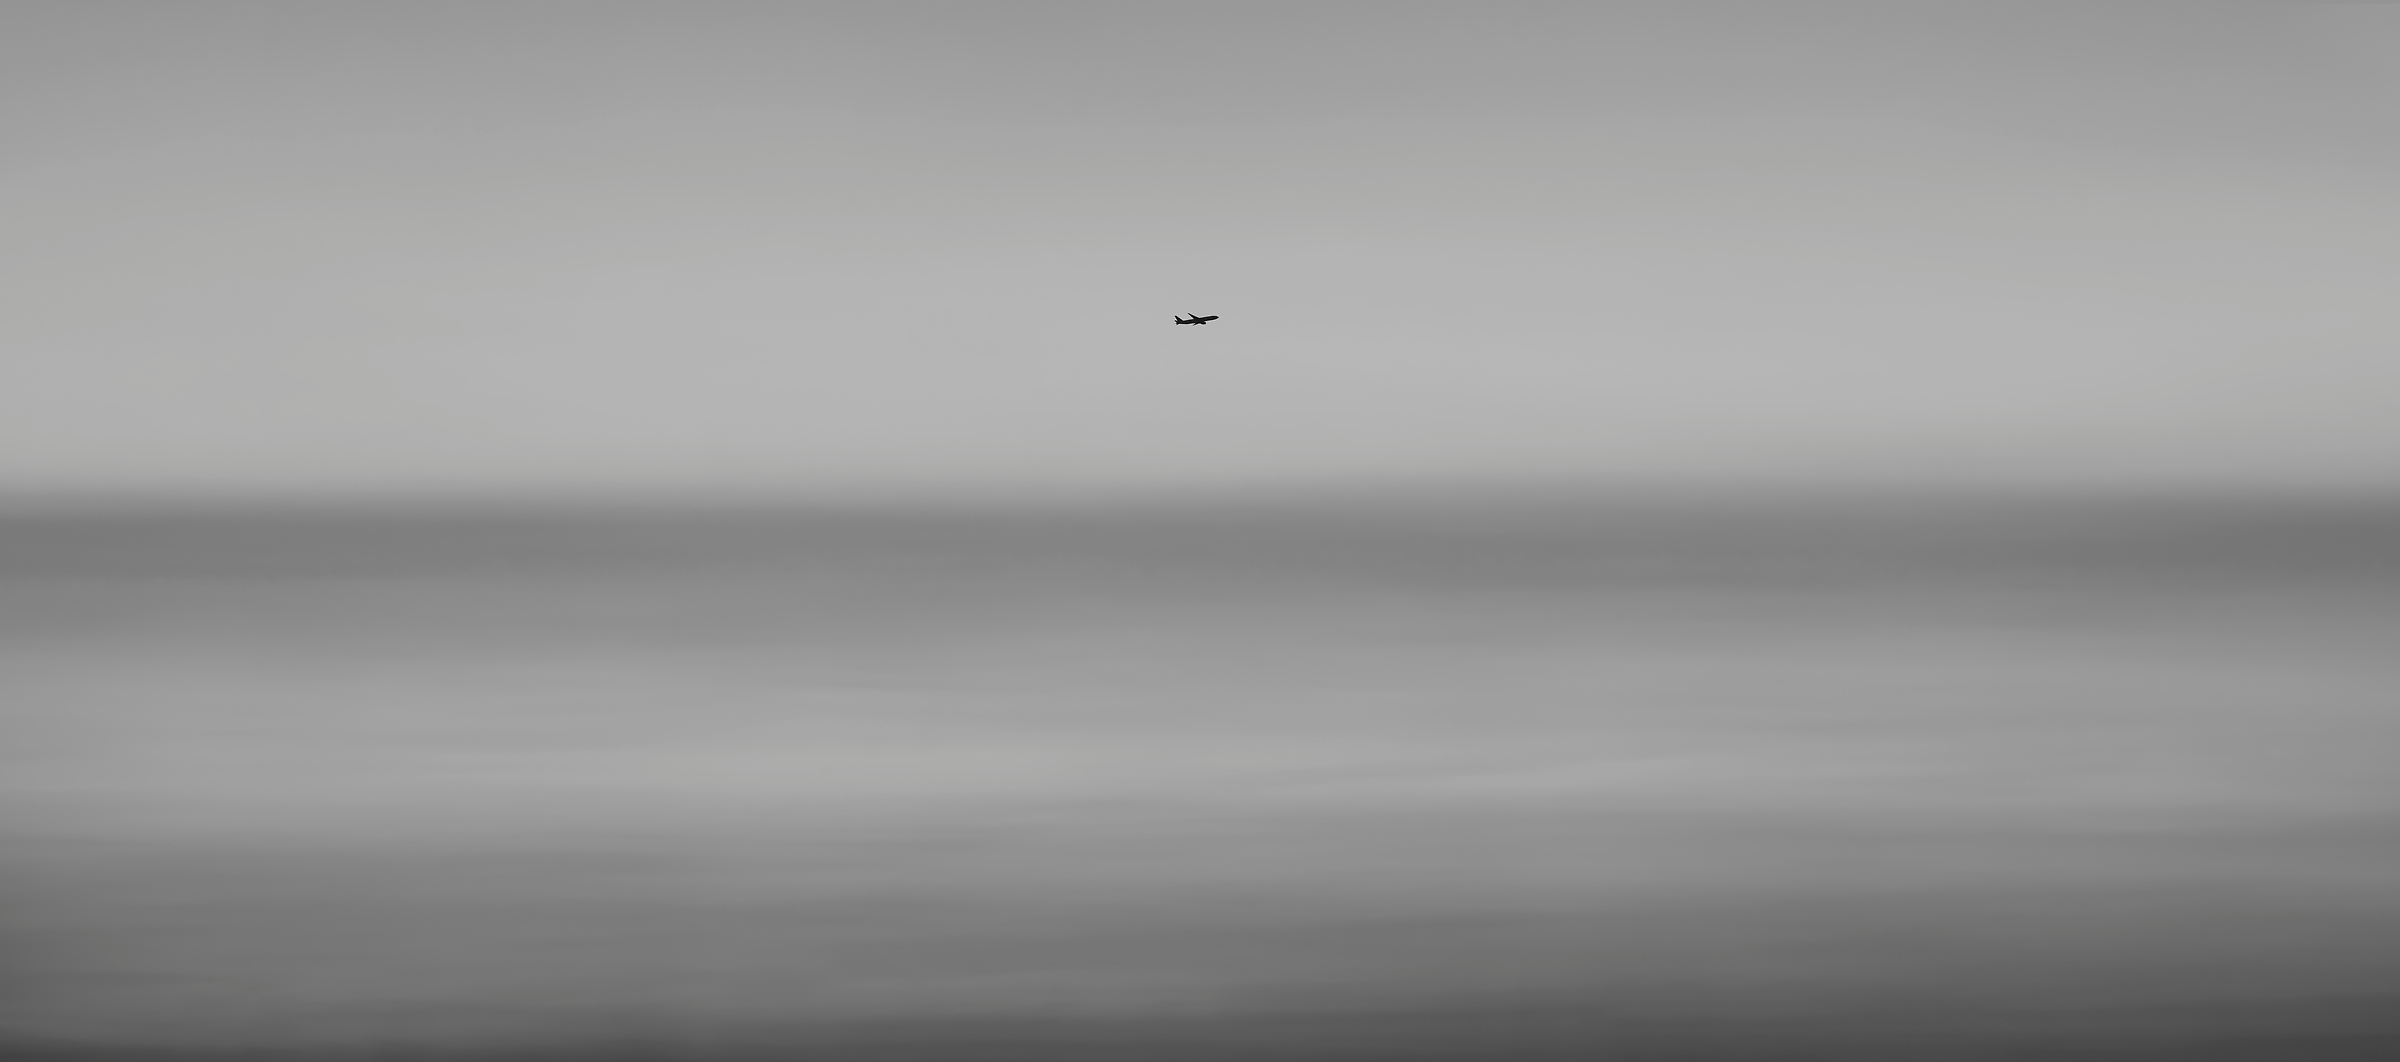 452 megapixels! A very high resolution, black & white VAST photo print of an airplane; fine art photograph created by Dan Piech in New York City